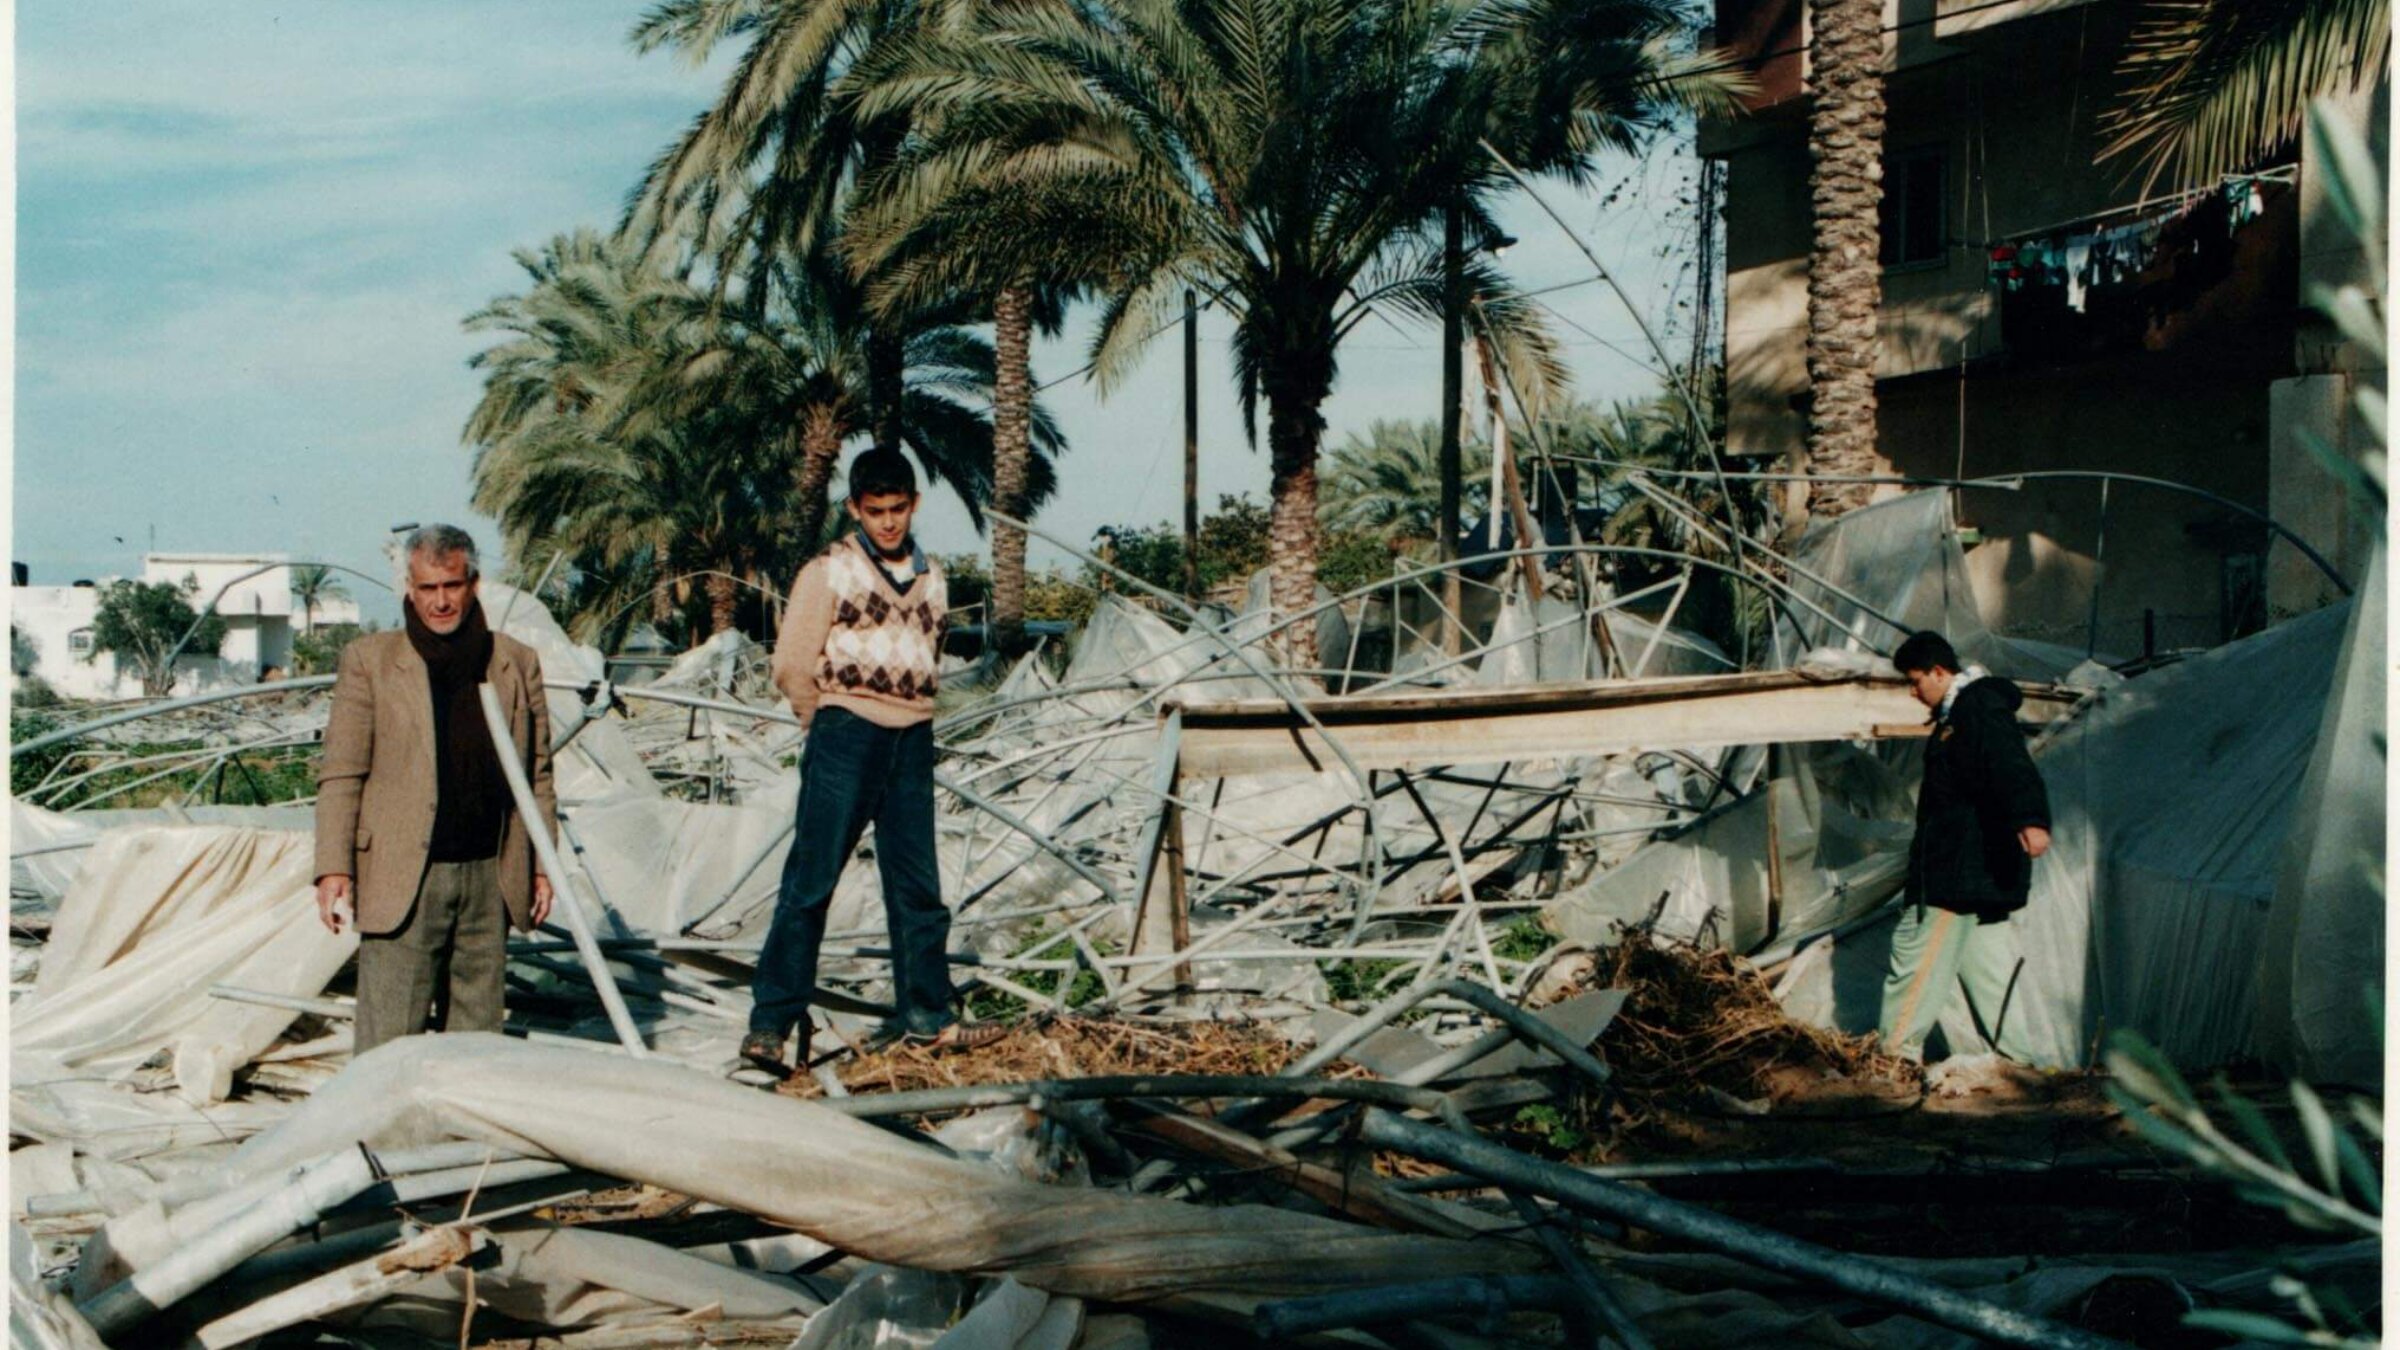 The author and his father, Khalil, at home in Gaza examining the destruction of their family's greenhouses by Israeli soldiers.